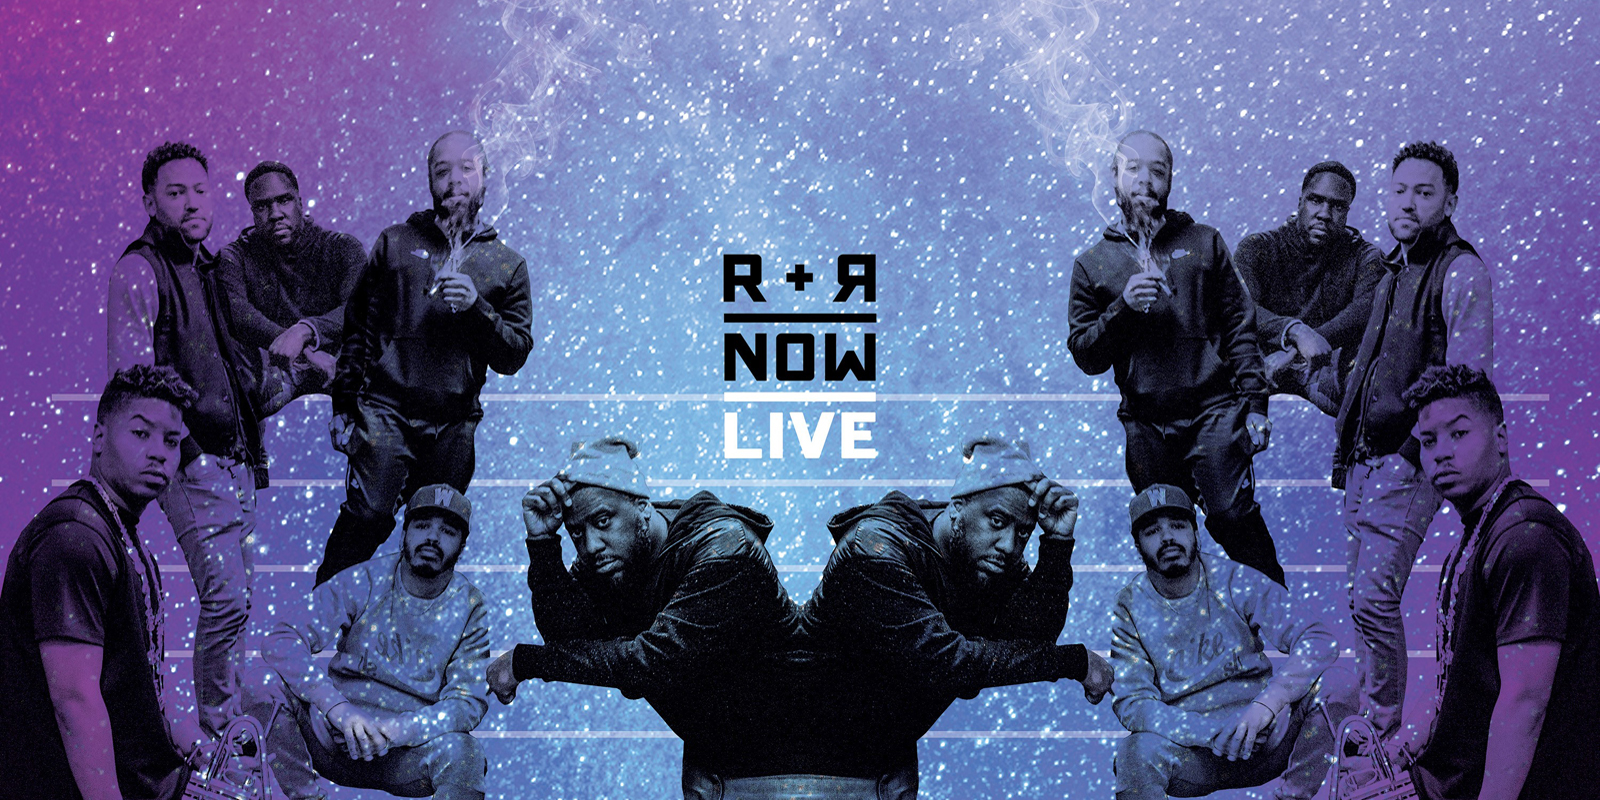 R+R=NOW Live